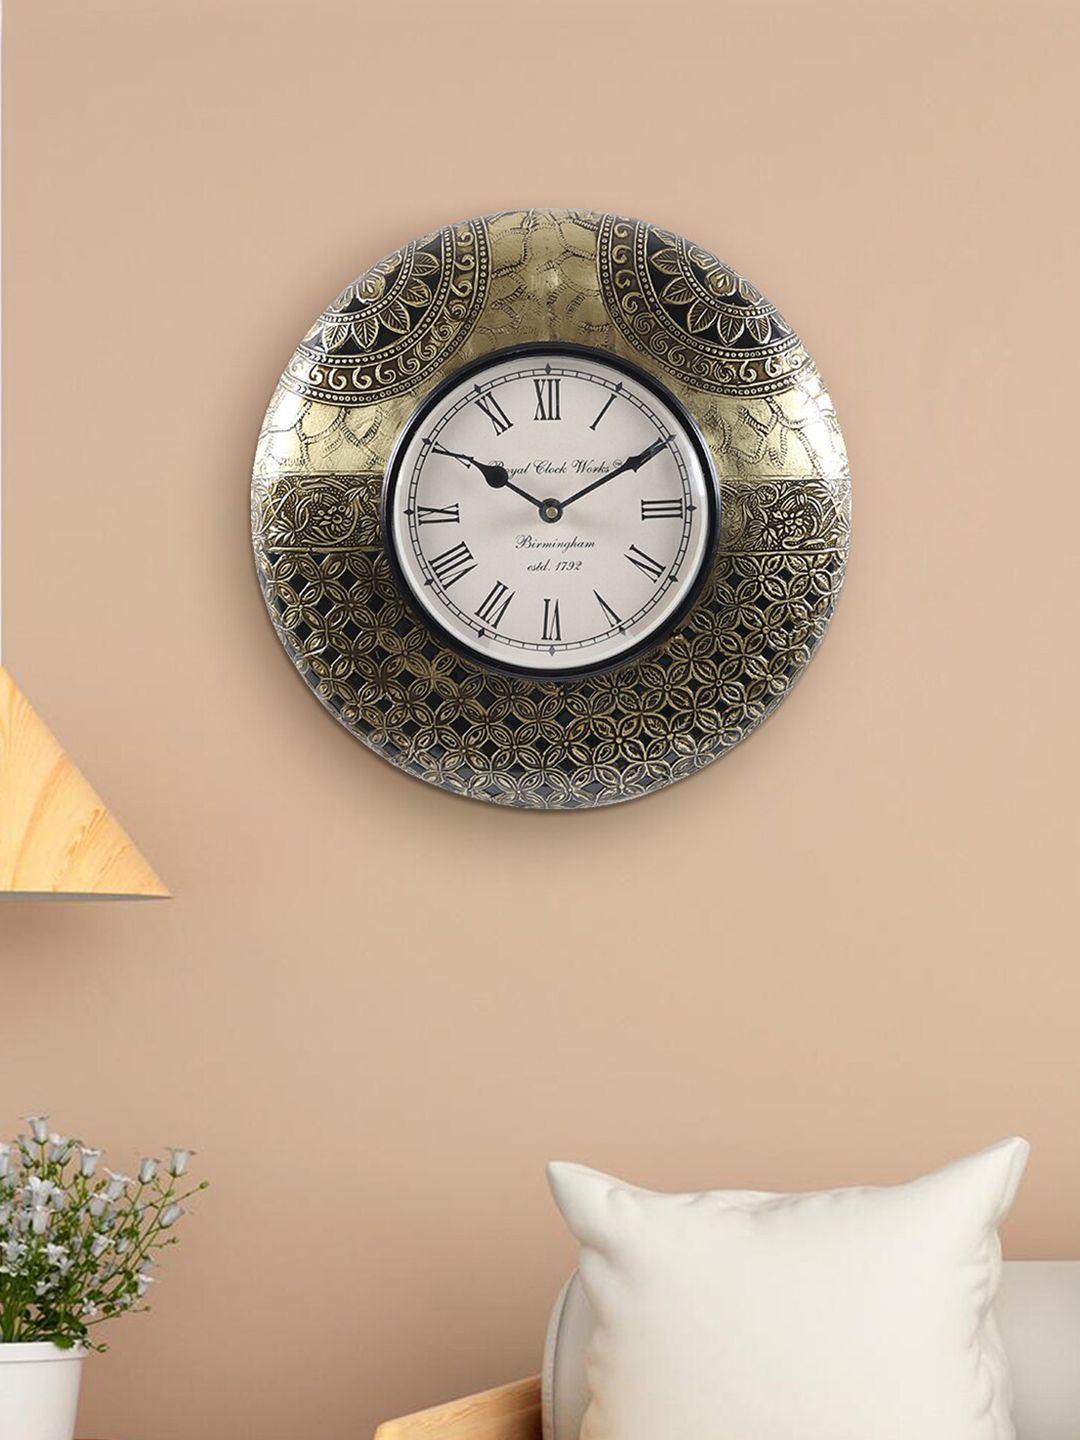 Aapno Rajasthan Gold-Toned & White Embellished Vintage Wall Clock Price in India